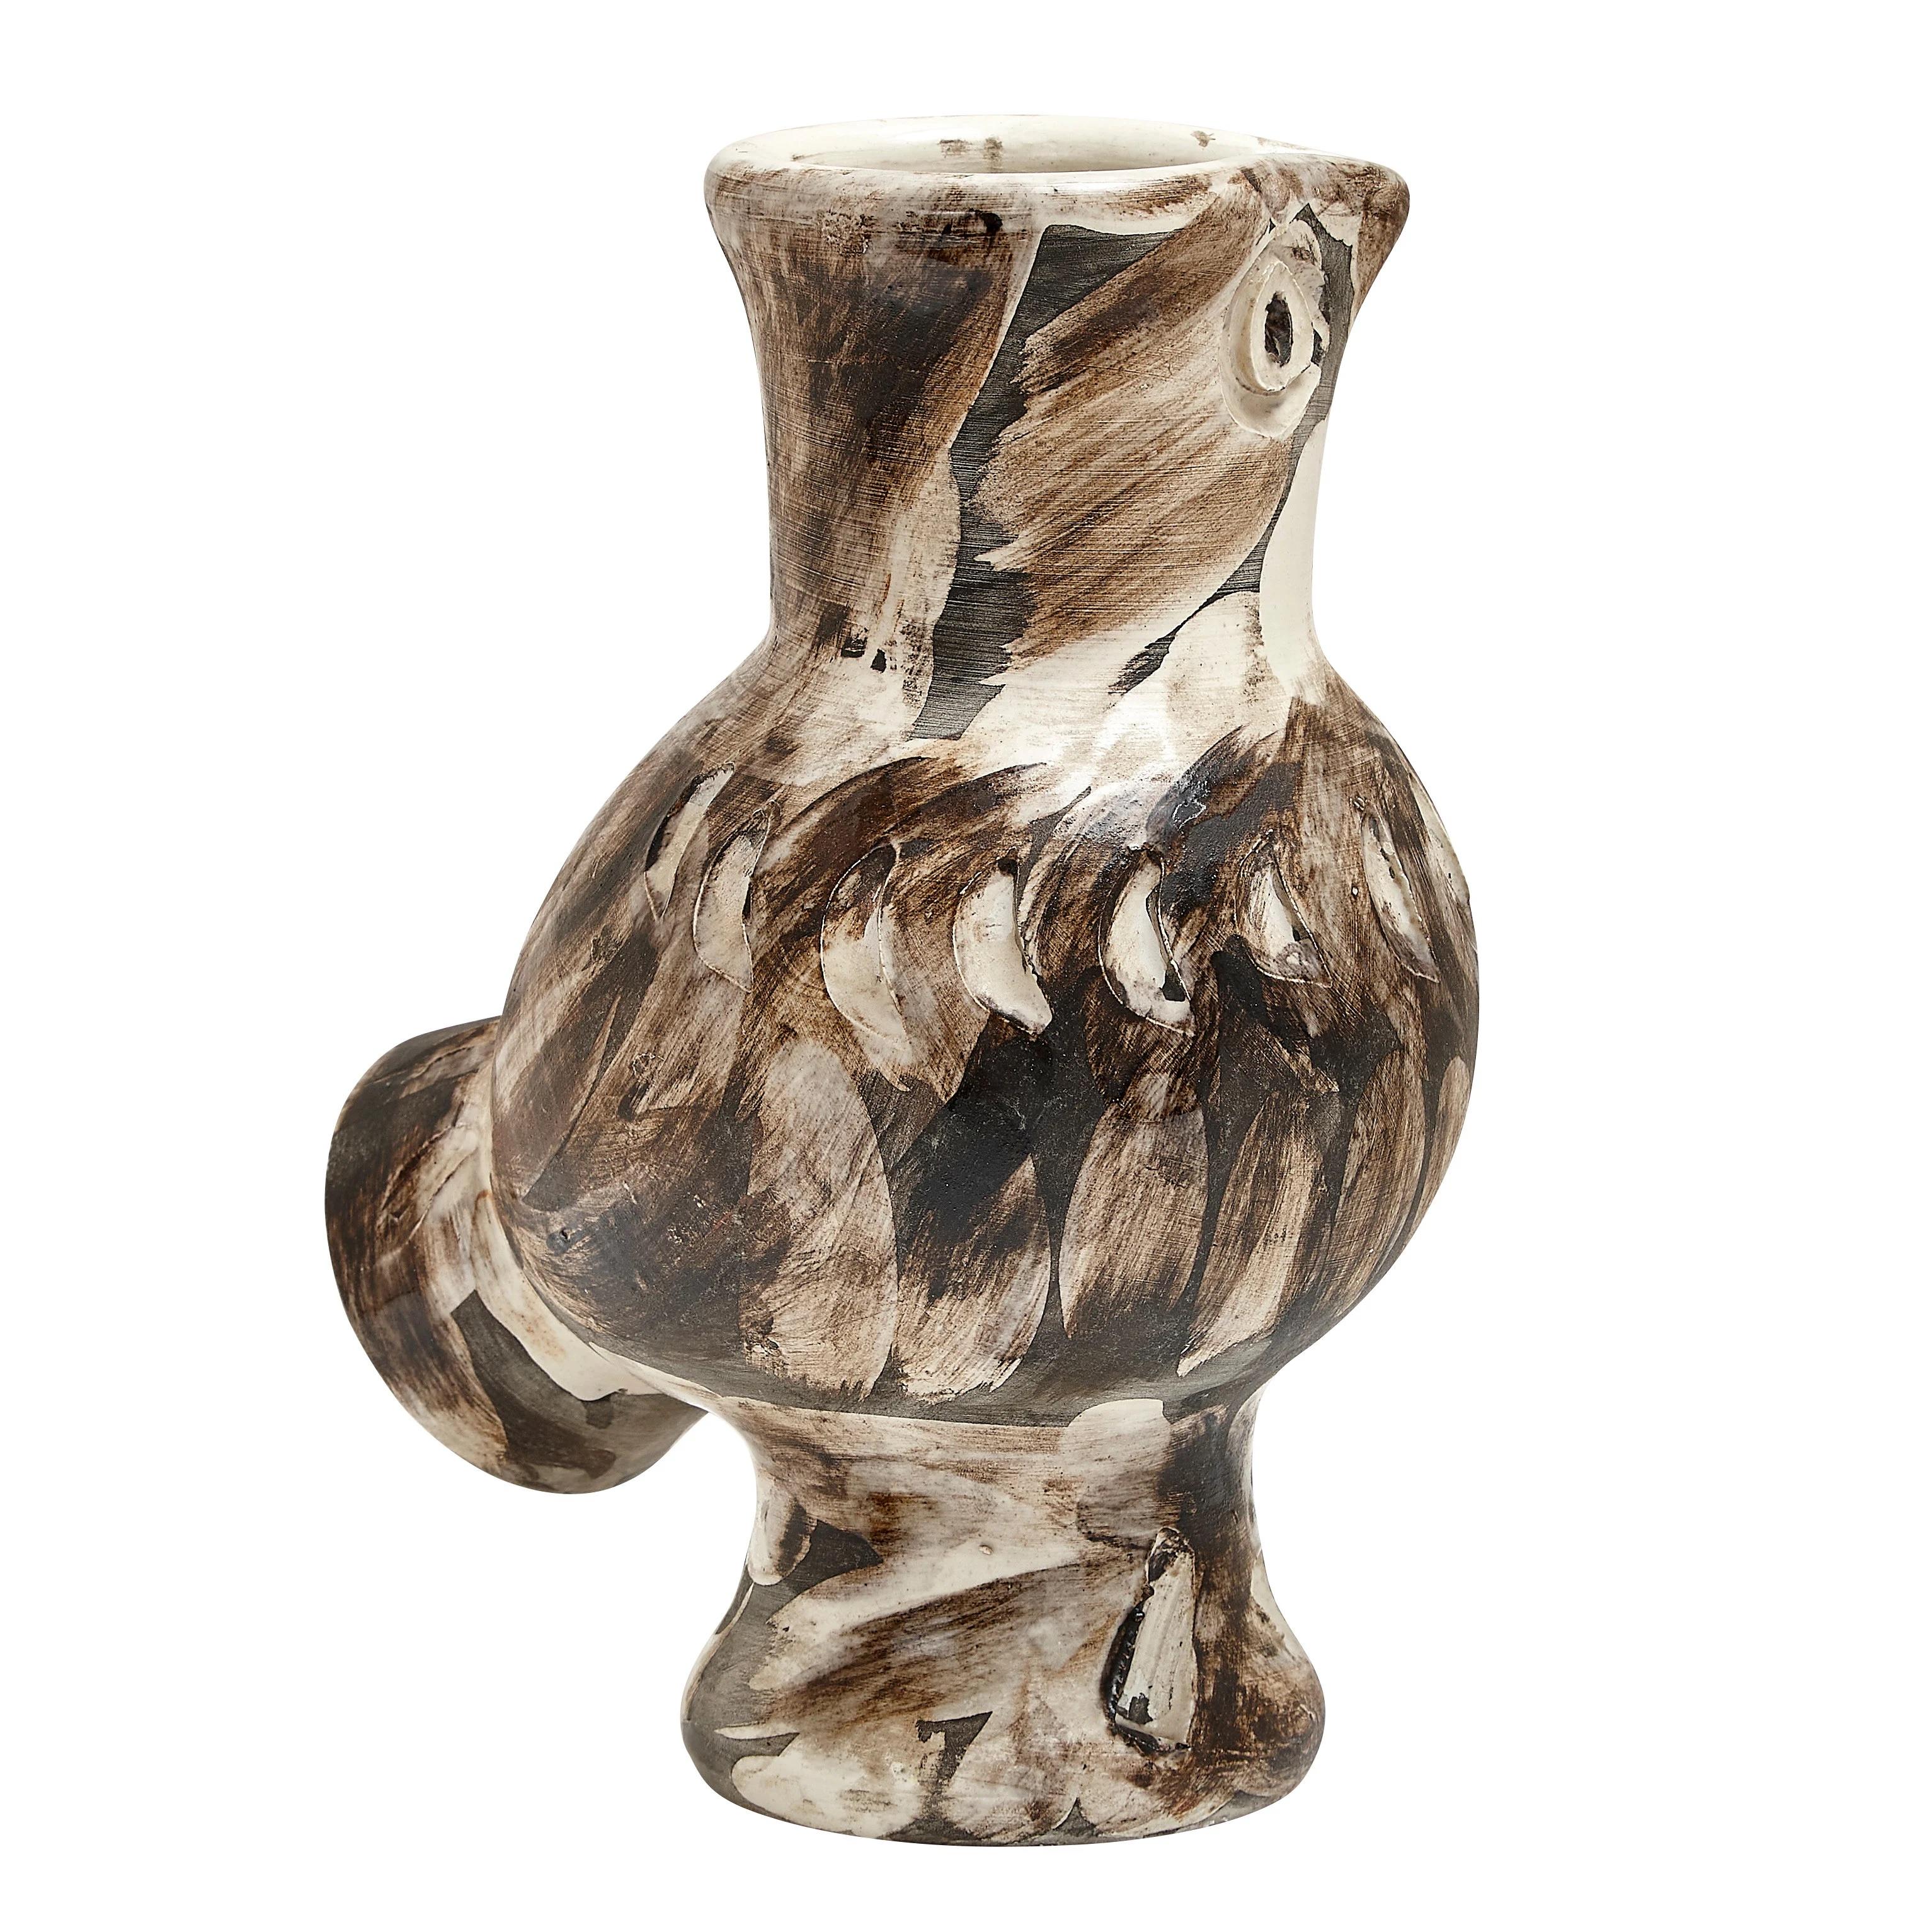 Pablo Picasso 'Chouette' (A. R. 604) Owl Madoura Vase 1969 For Sale 2